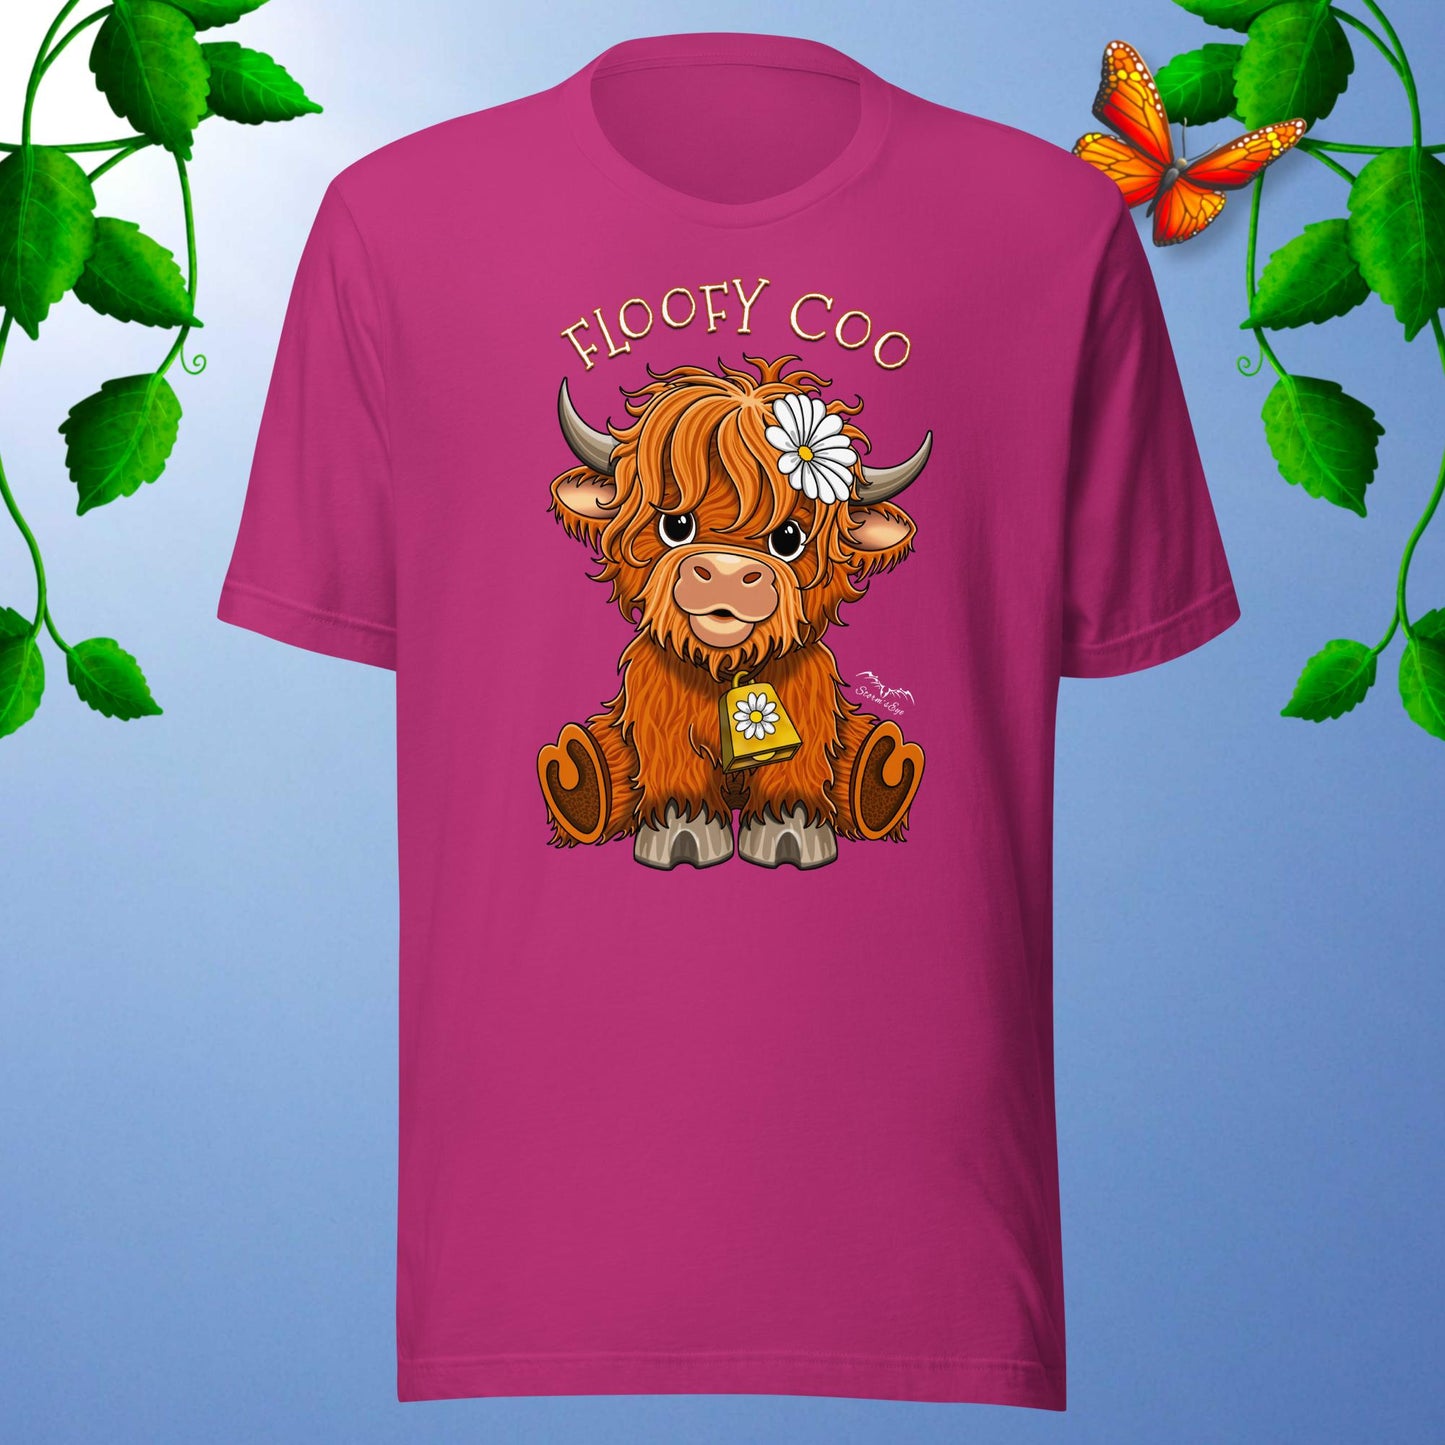 floofy coo highland cow T-shirt, bright pink by Stormseye Design